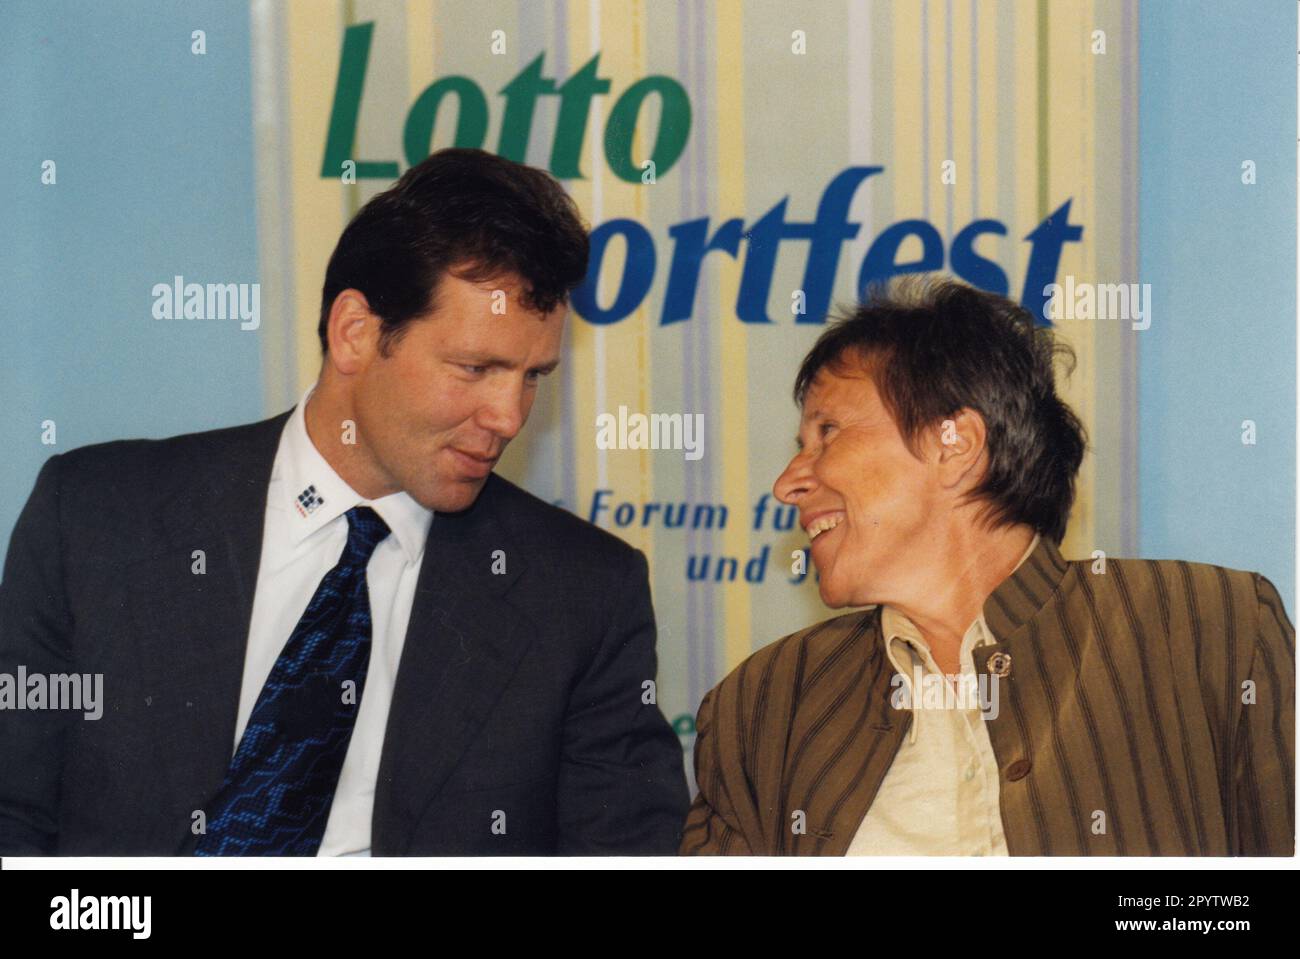 Sports Minister Angelika Peter(r.) at the press conference on the project, Lotto Sports Festival with patron Henry Maske(l.) in Potsdam. Sports. Minister. Photo:/MAZ Bernd gartenschläger, 26.05.1998 [automated translation] Stock Photo